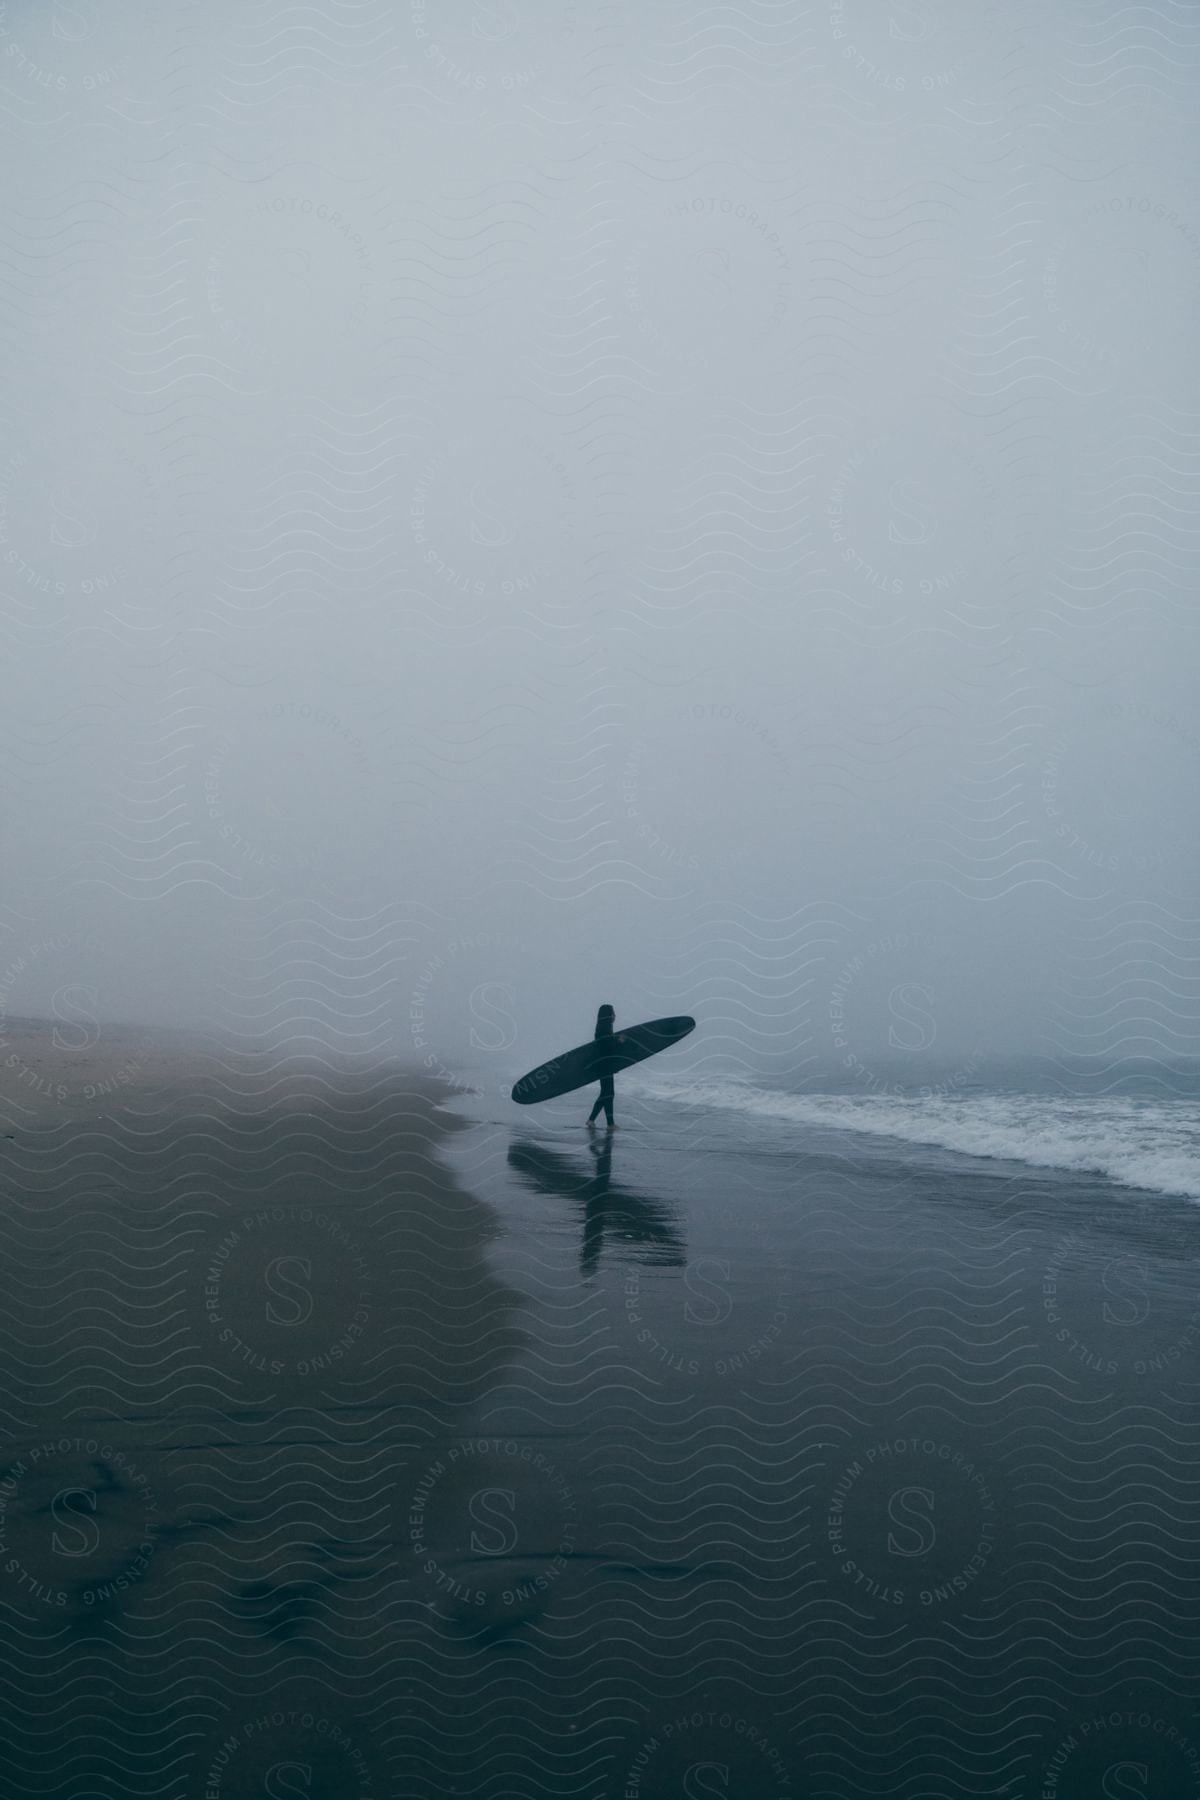 A person surfing on the ocean waves